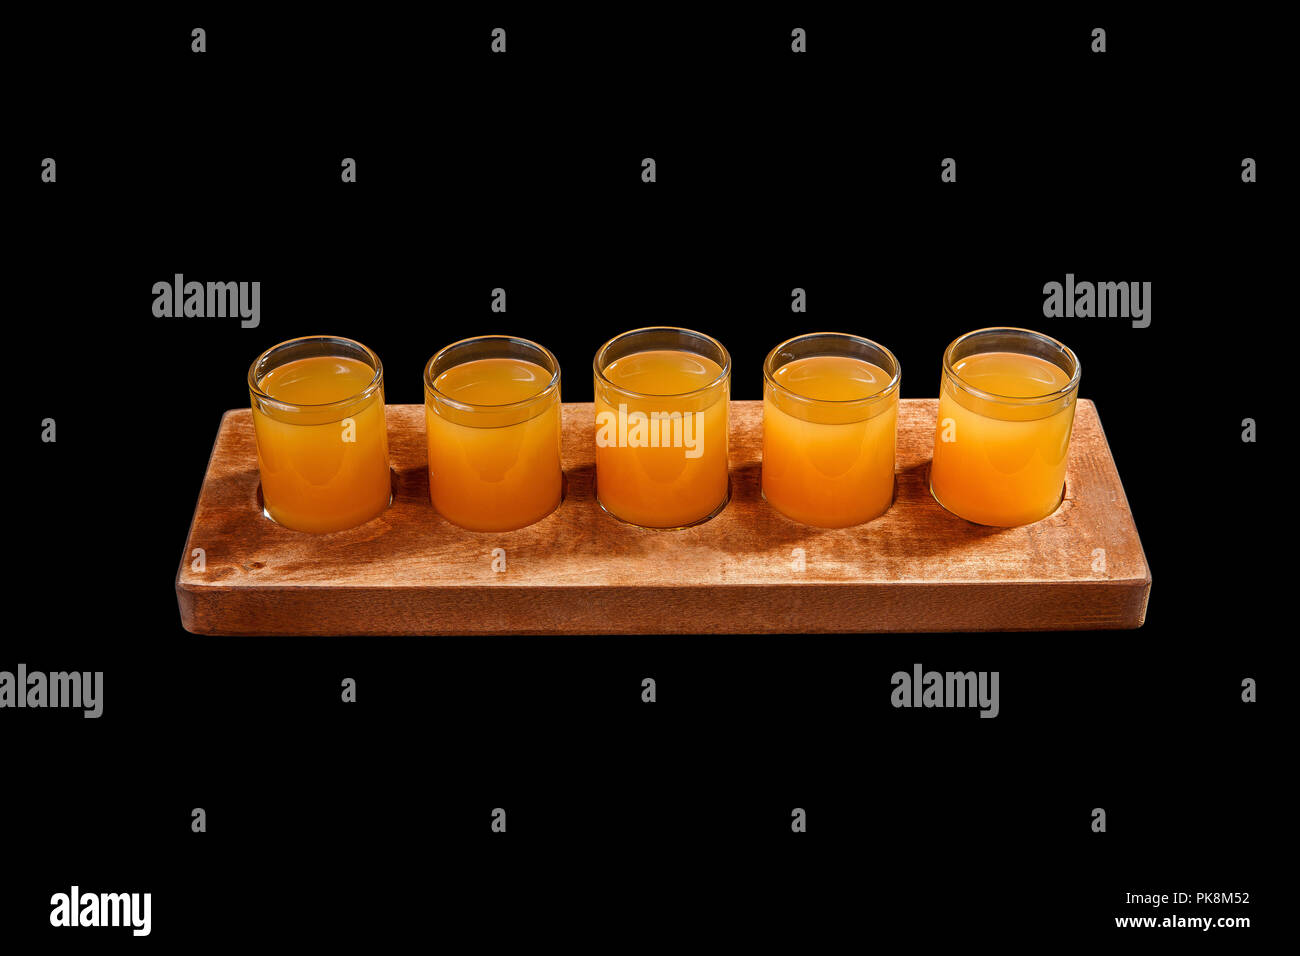 Yellow, same color opaque cocktails, a set of shots in one row, five servings on a wooden stand, substrate. Side view Isolated black background. Drink Stock Photo